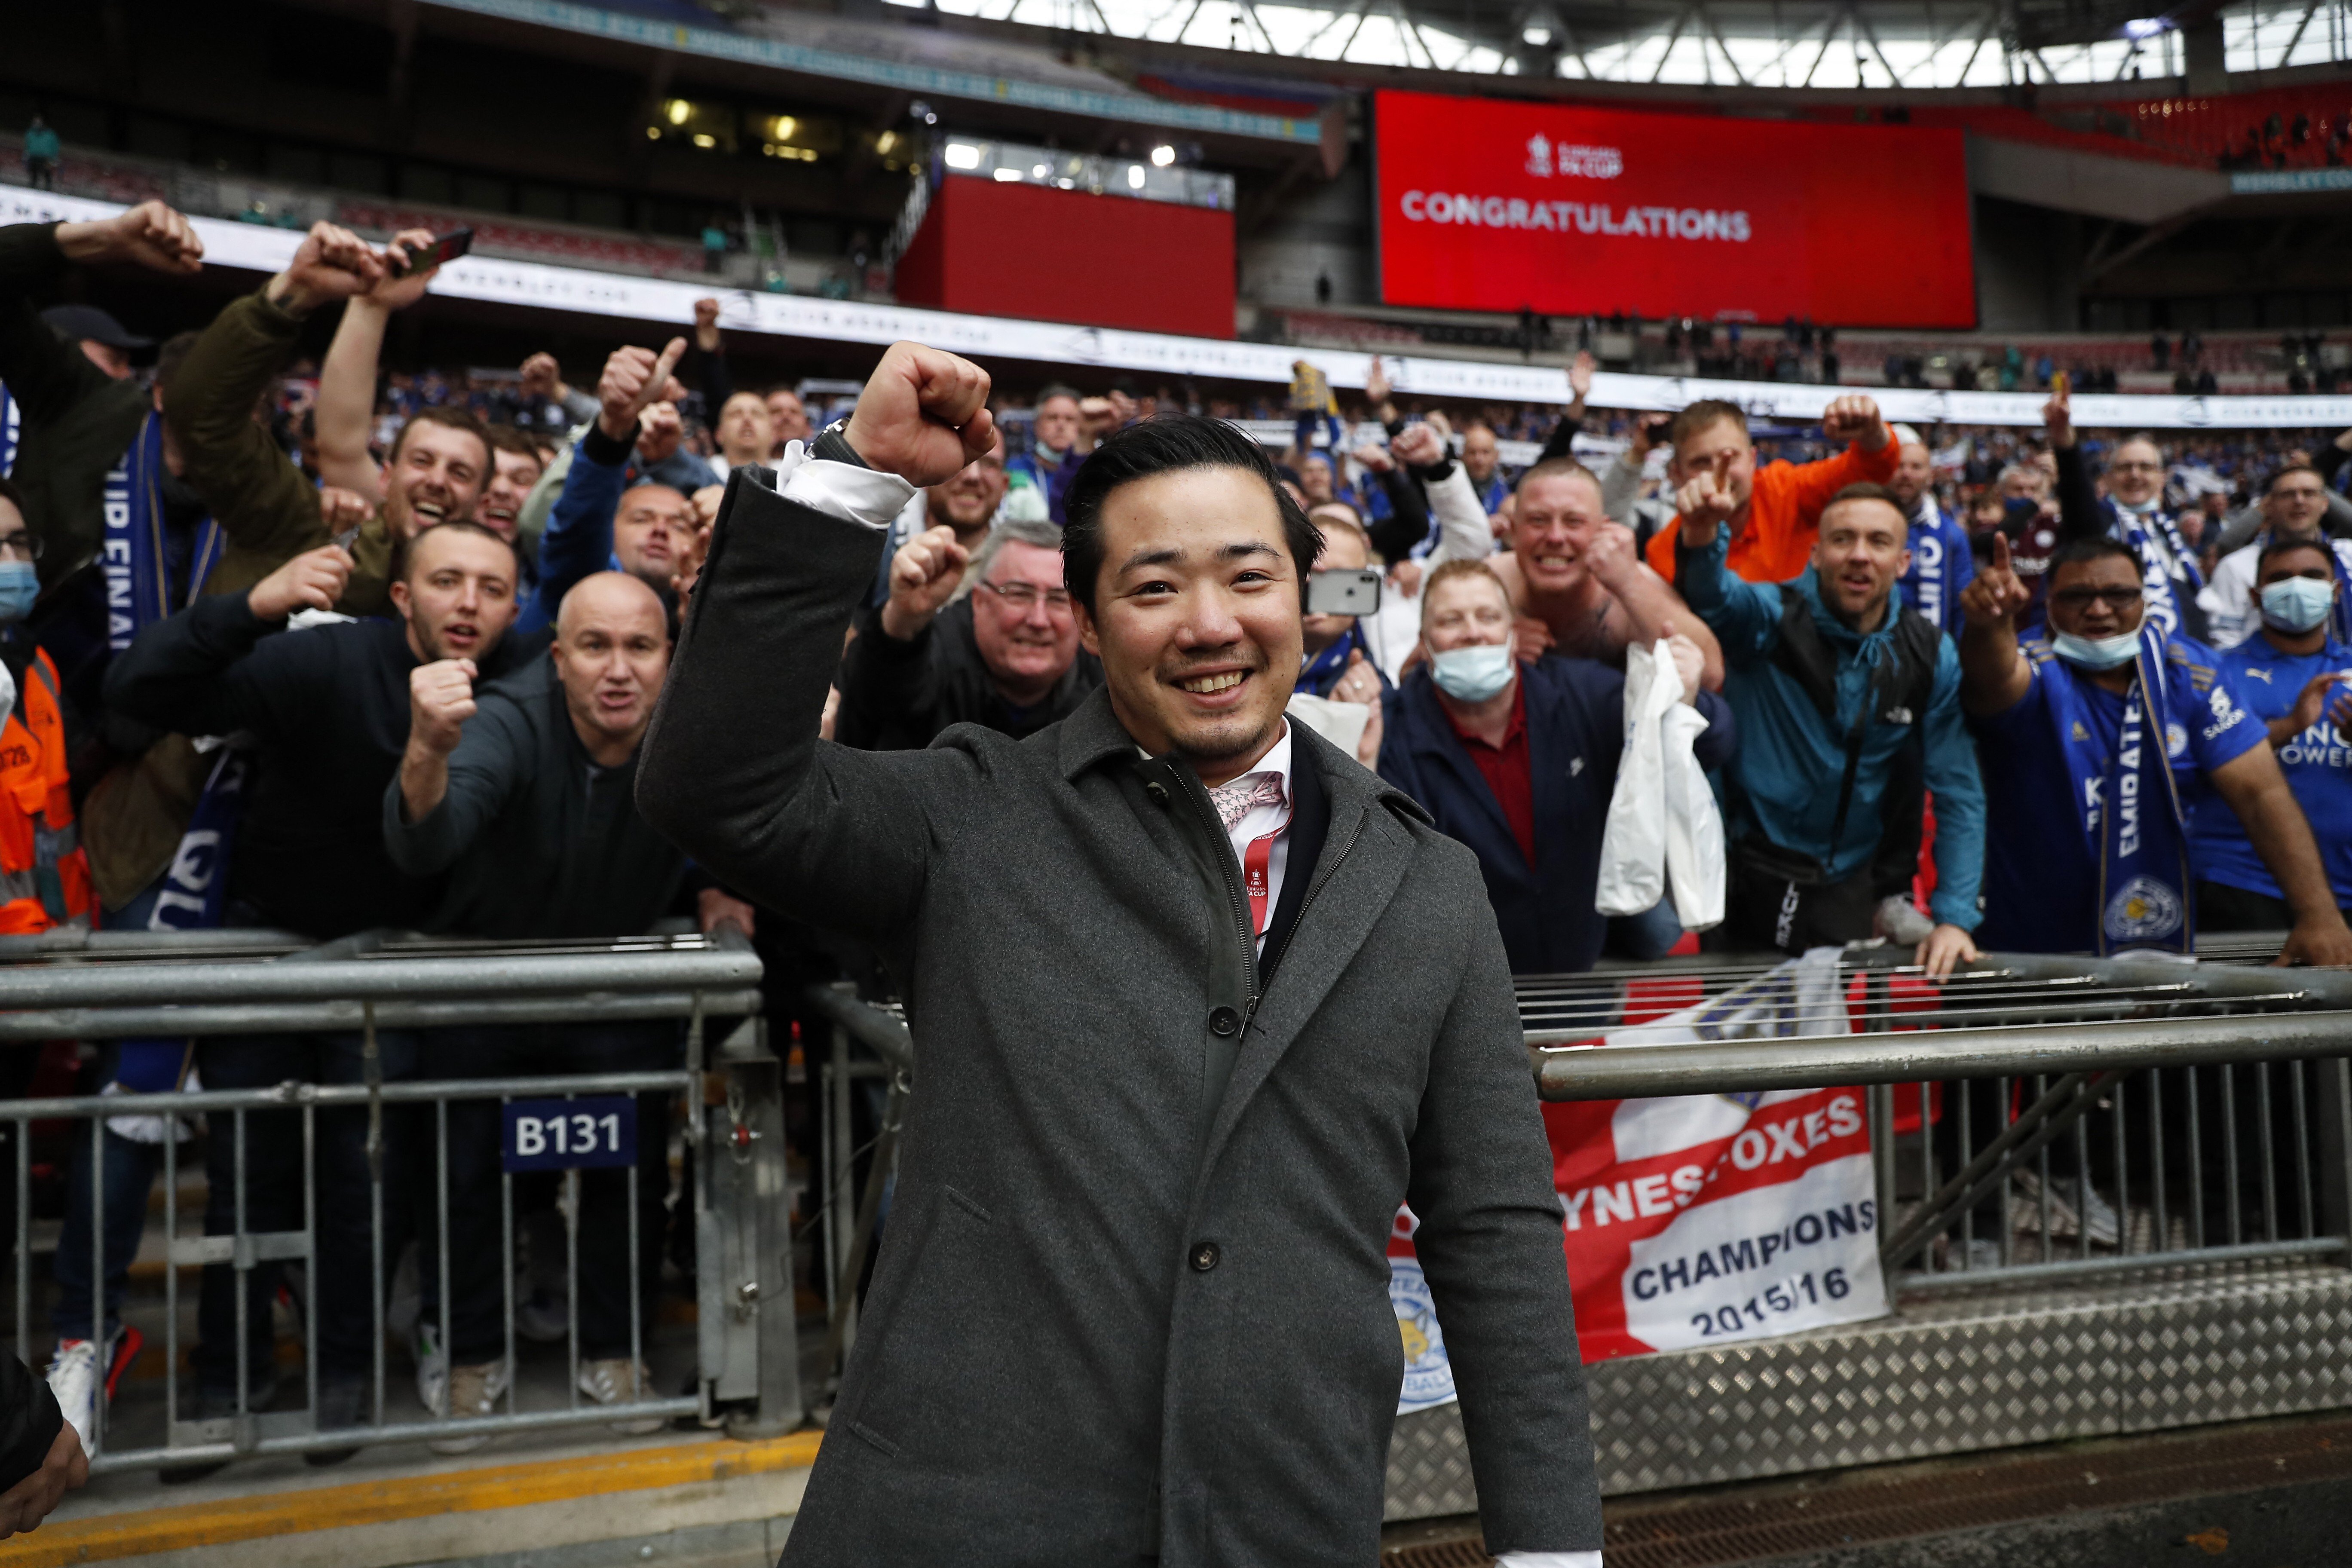 Leicester City’s chairman Aiyawatt Srivaddhanaprabha celebrates with fans after the club defeated Chelsea to win the FA Cup. Photo: AFP